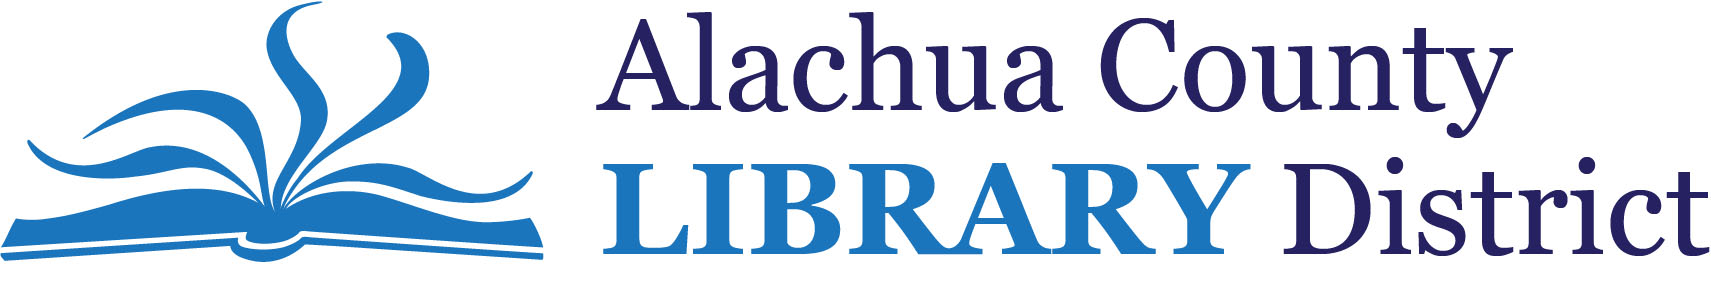 Find out more about Alachua County Library District: Library website, hours, locations, catalog, Inter-Library Loan, Genealogy Information, etc